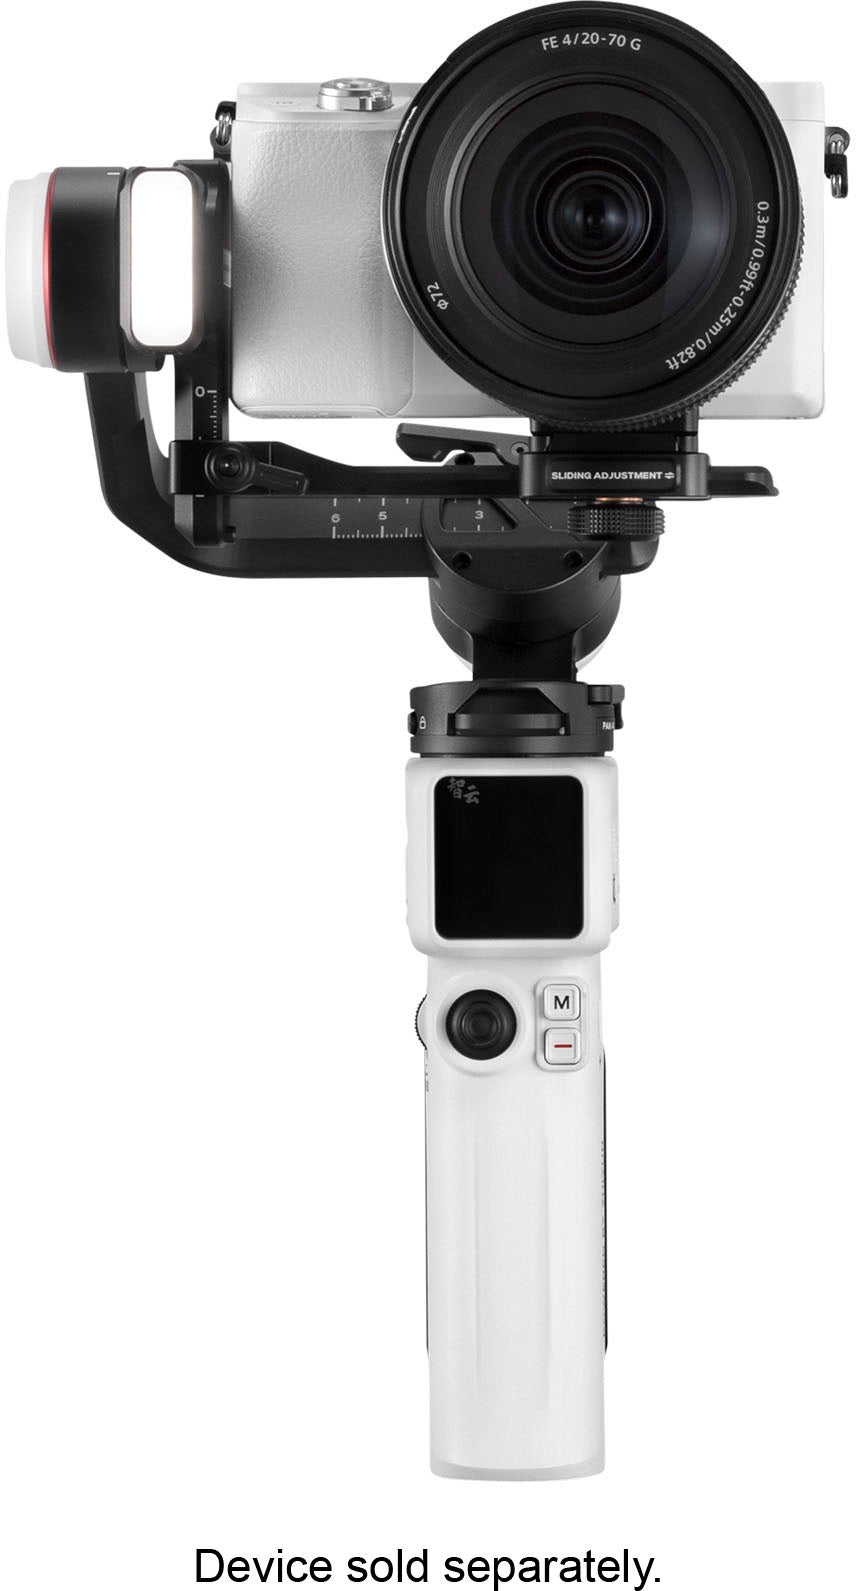 Zhiyun - Crane-M 3S 3-Axis Gimbal Stabilizer Standard for Smartphones, Action or Mirrorless Cameras w/ detachable tri-pod stand - White_9